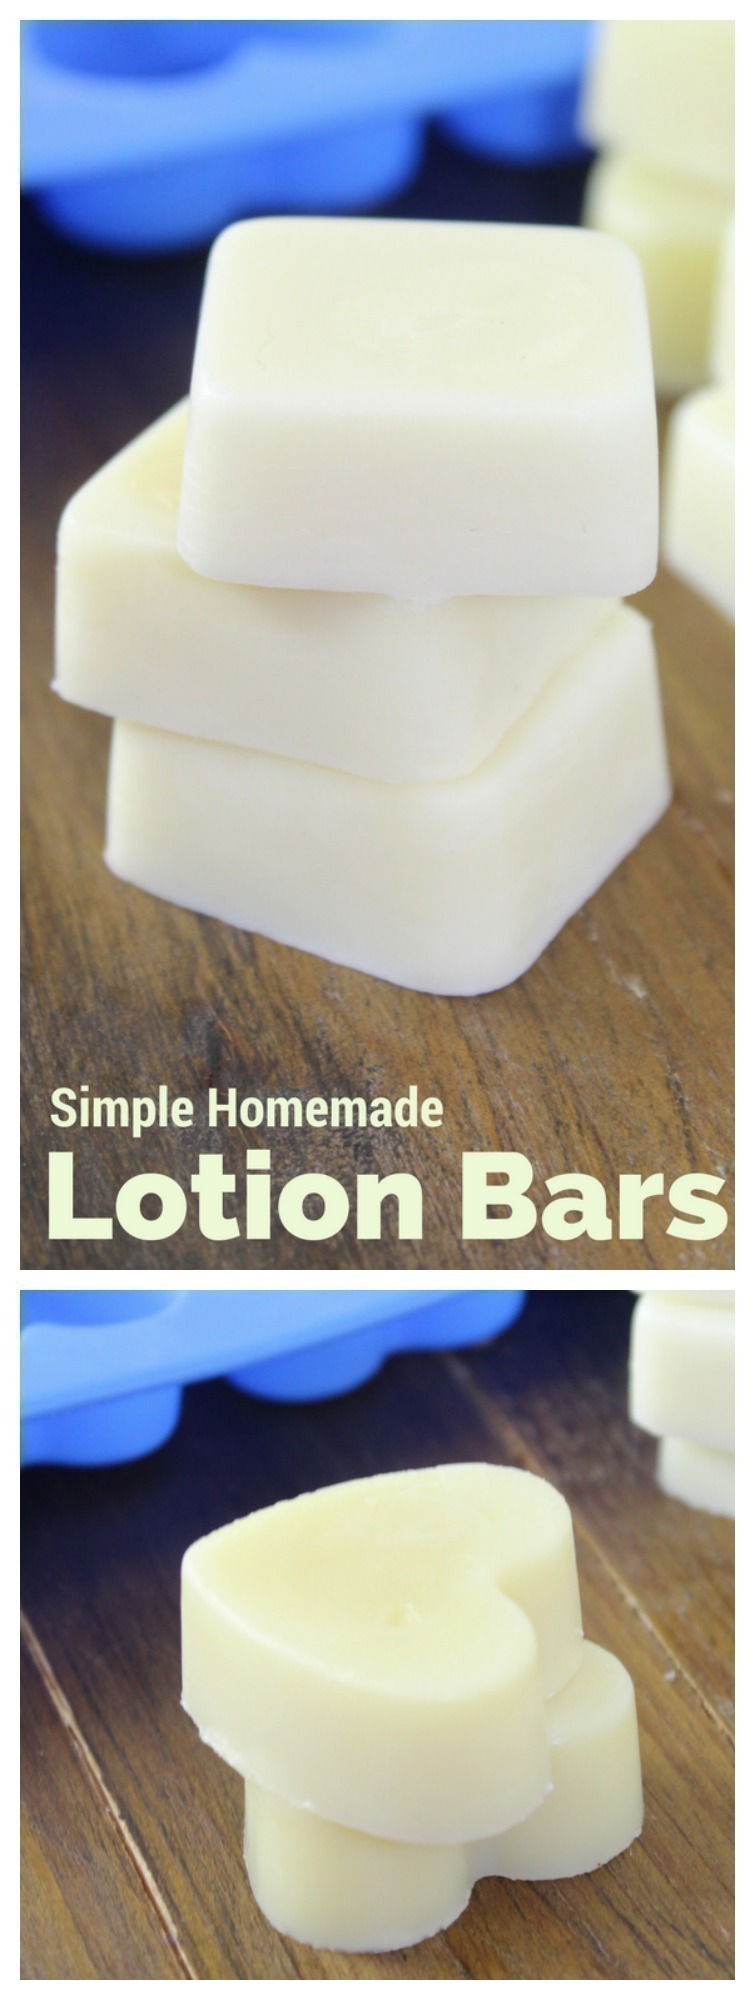 These simple, homemade lotion bars are an incredibly cute and easy way to moisturize dry skin!